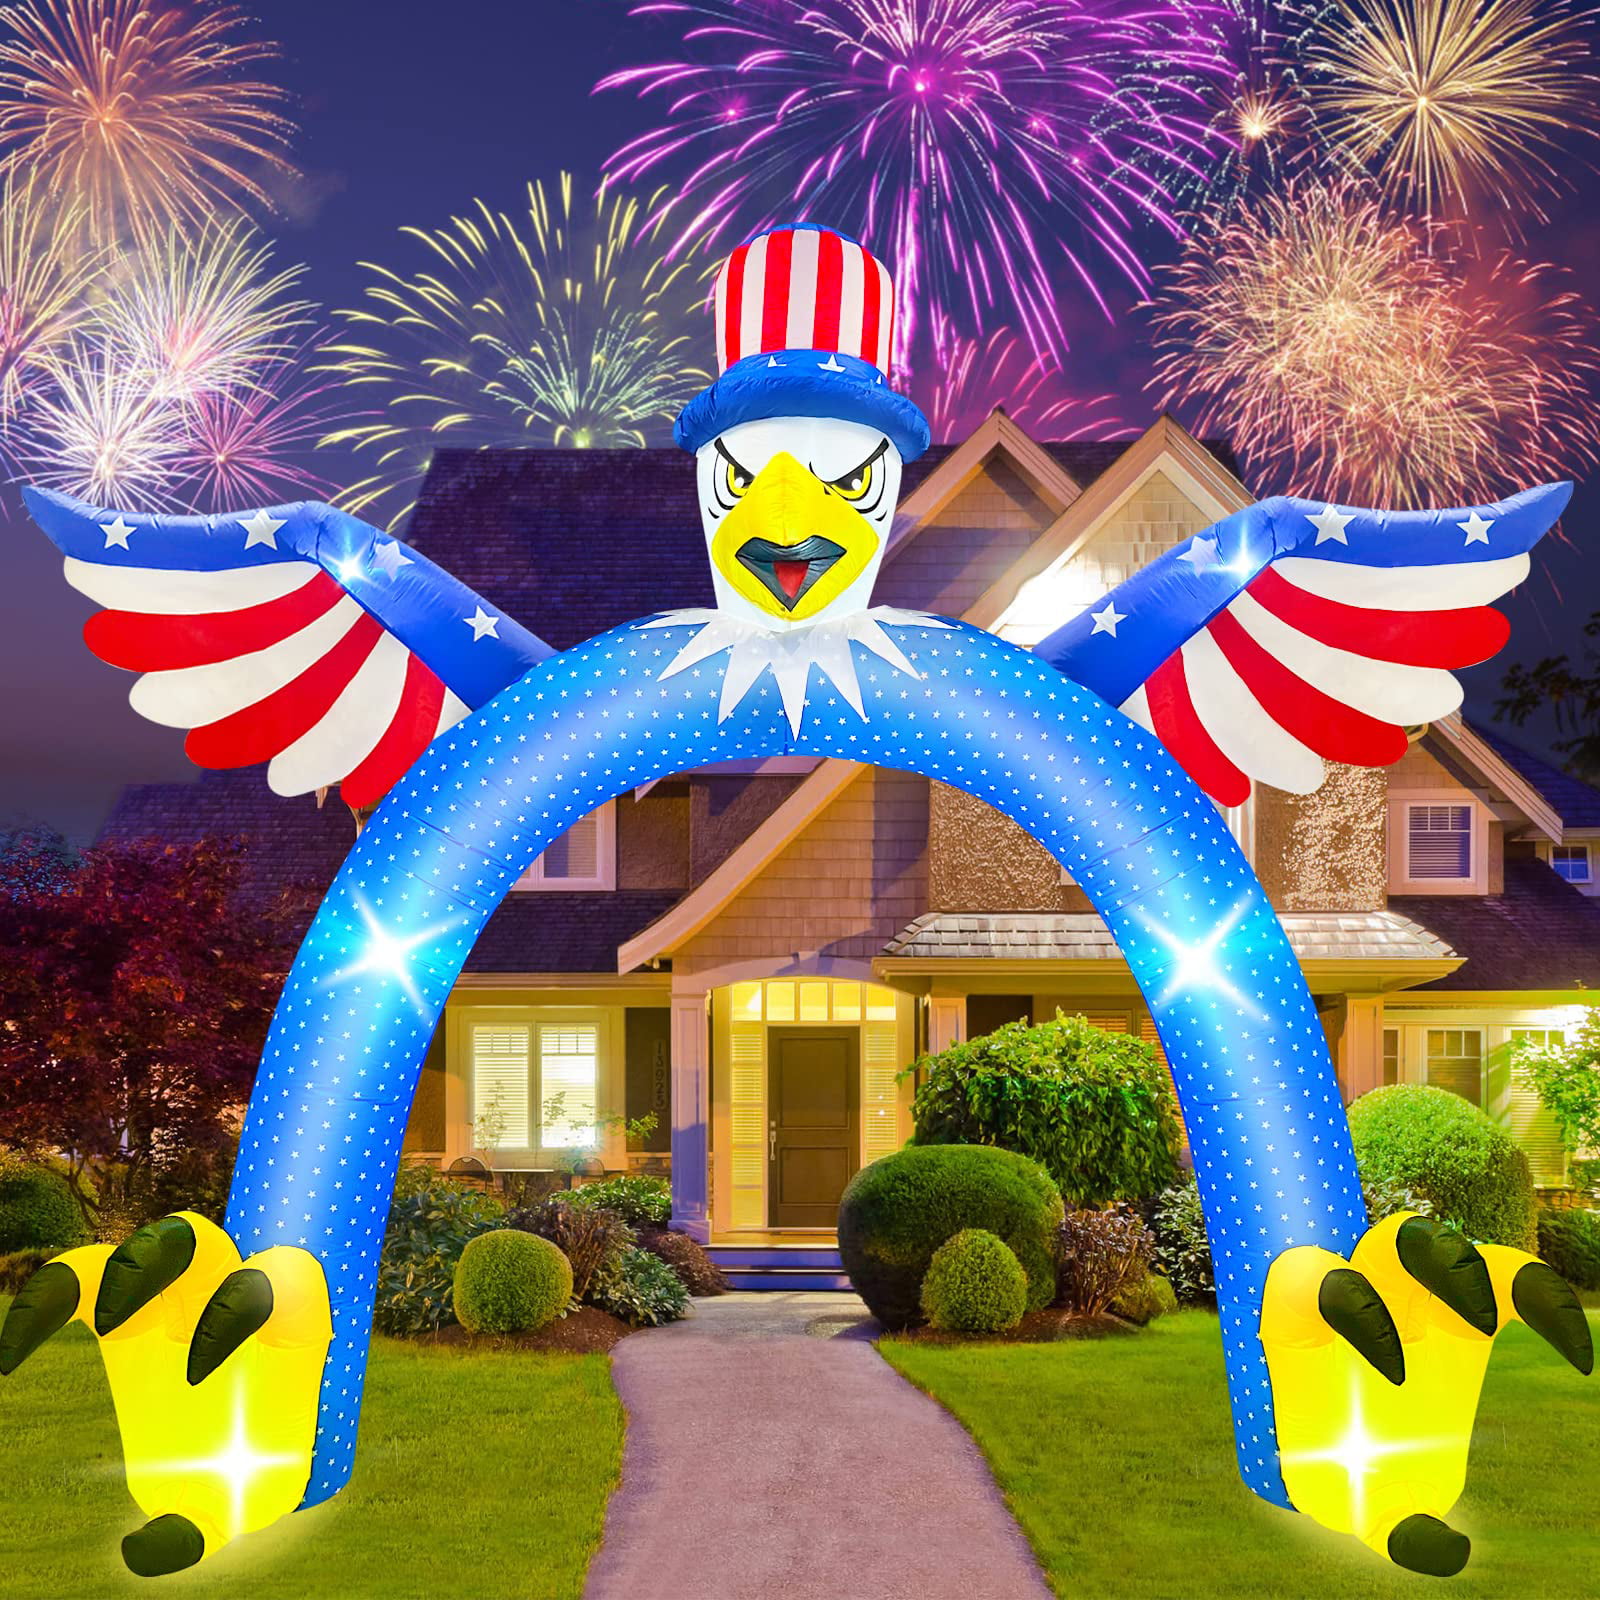 iFanze 9FT Tall Patriotic Independence Day Inflatable Archway 4th ...